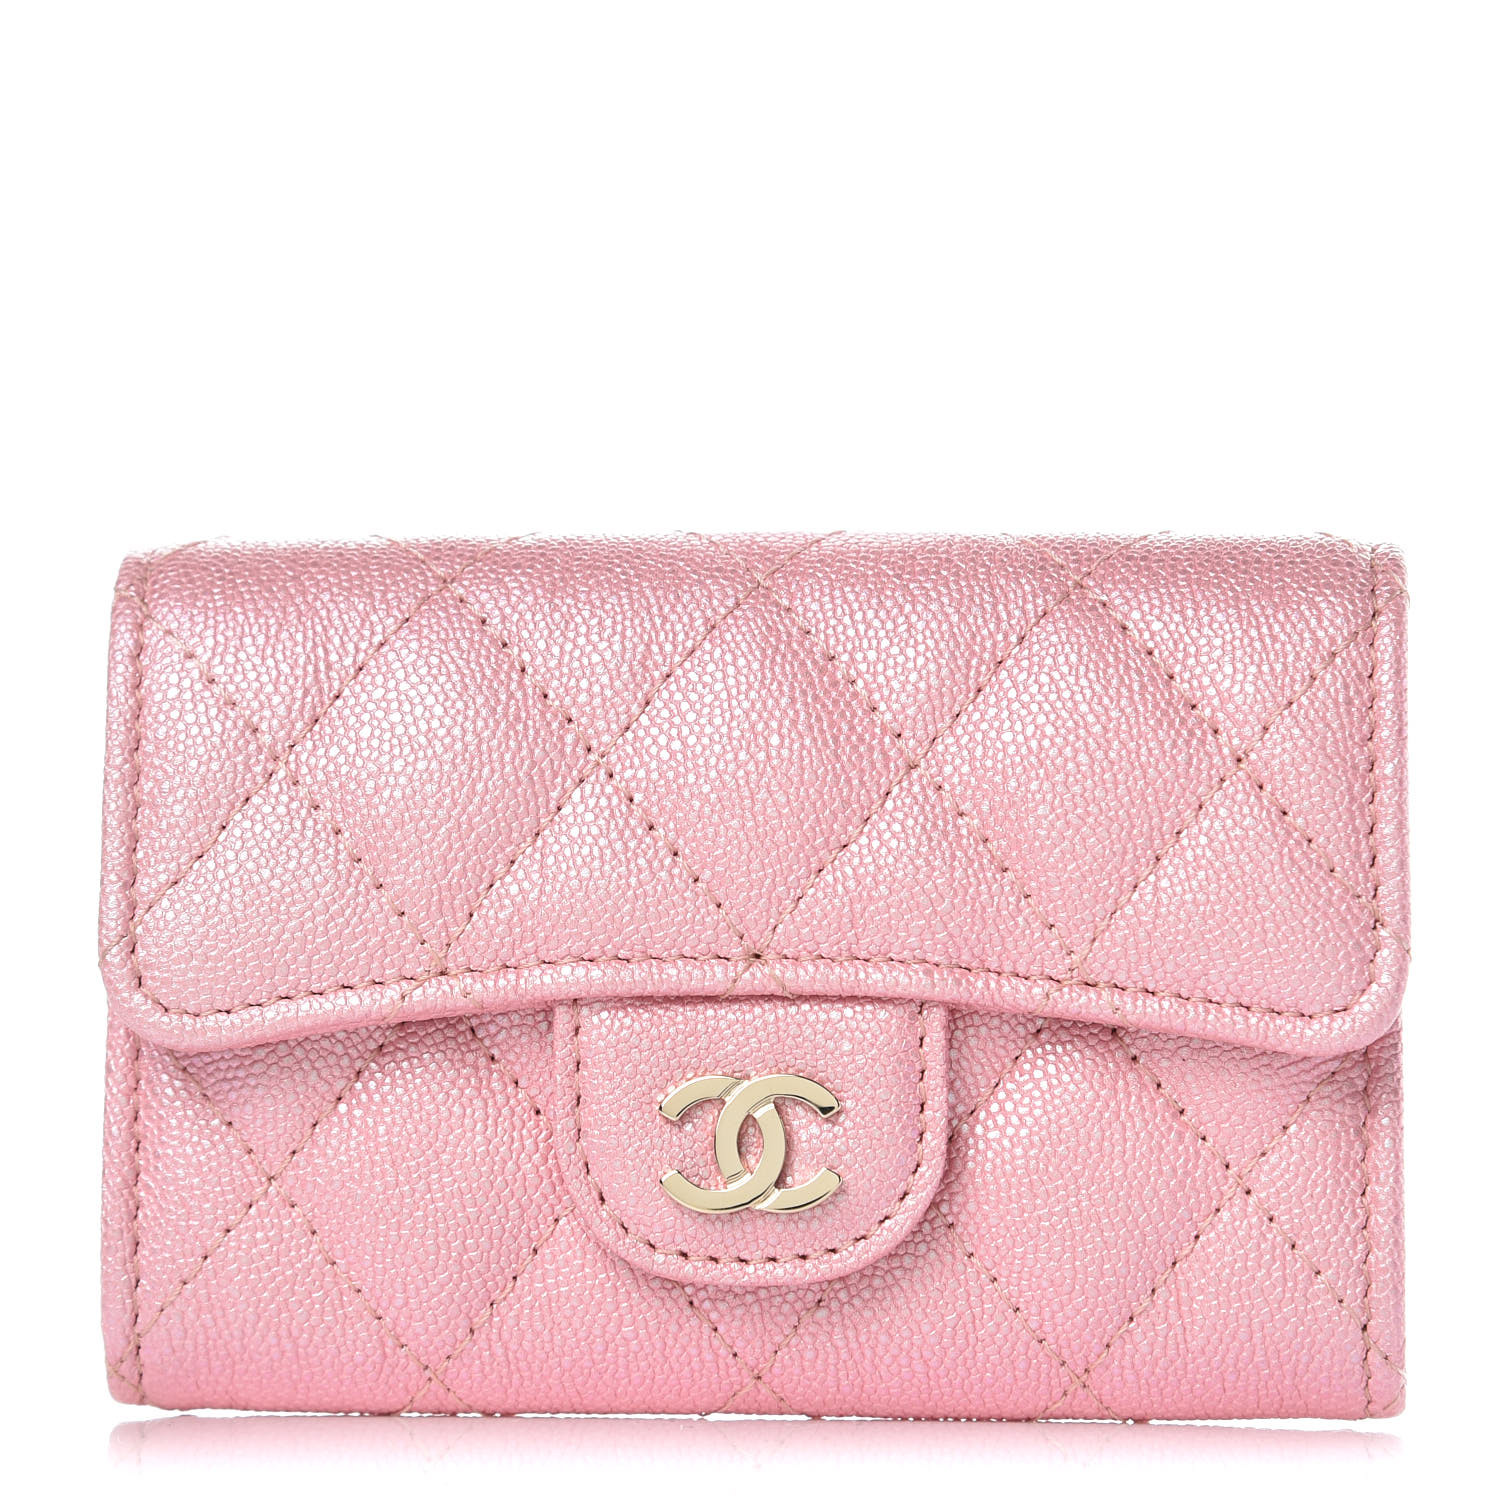 CHANEL Iridescent Caviar Quilted Flap Card Holder Pink 372725